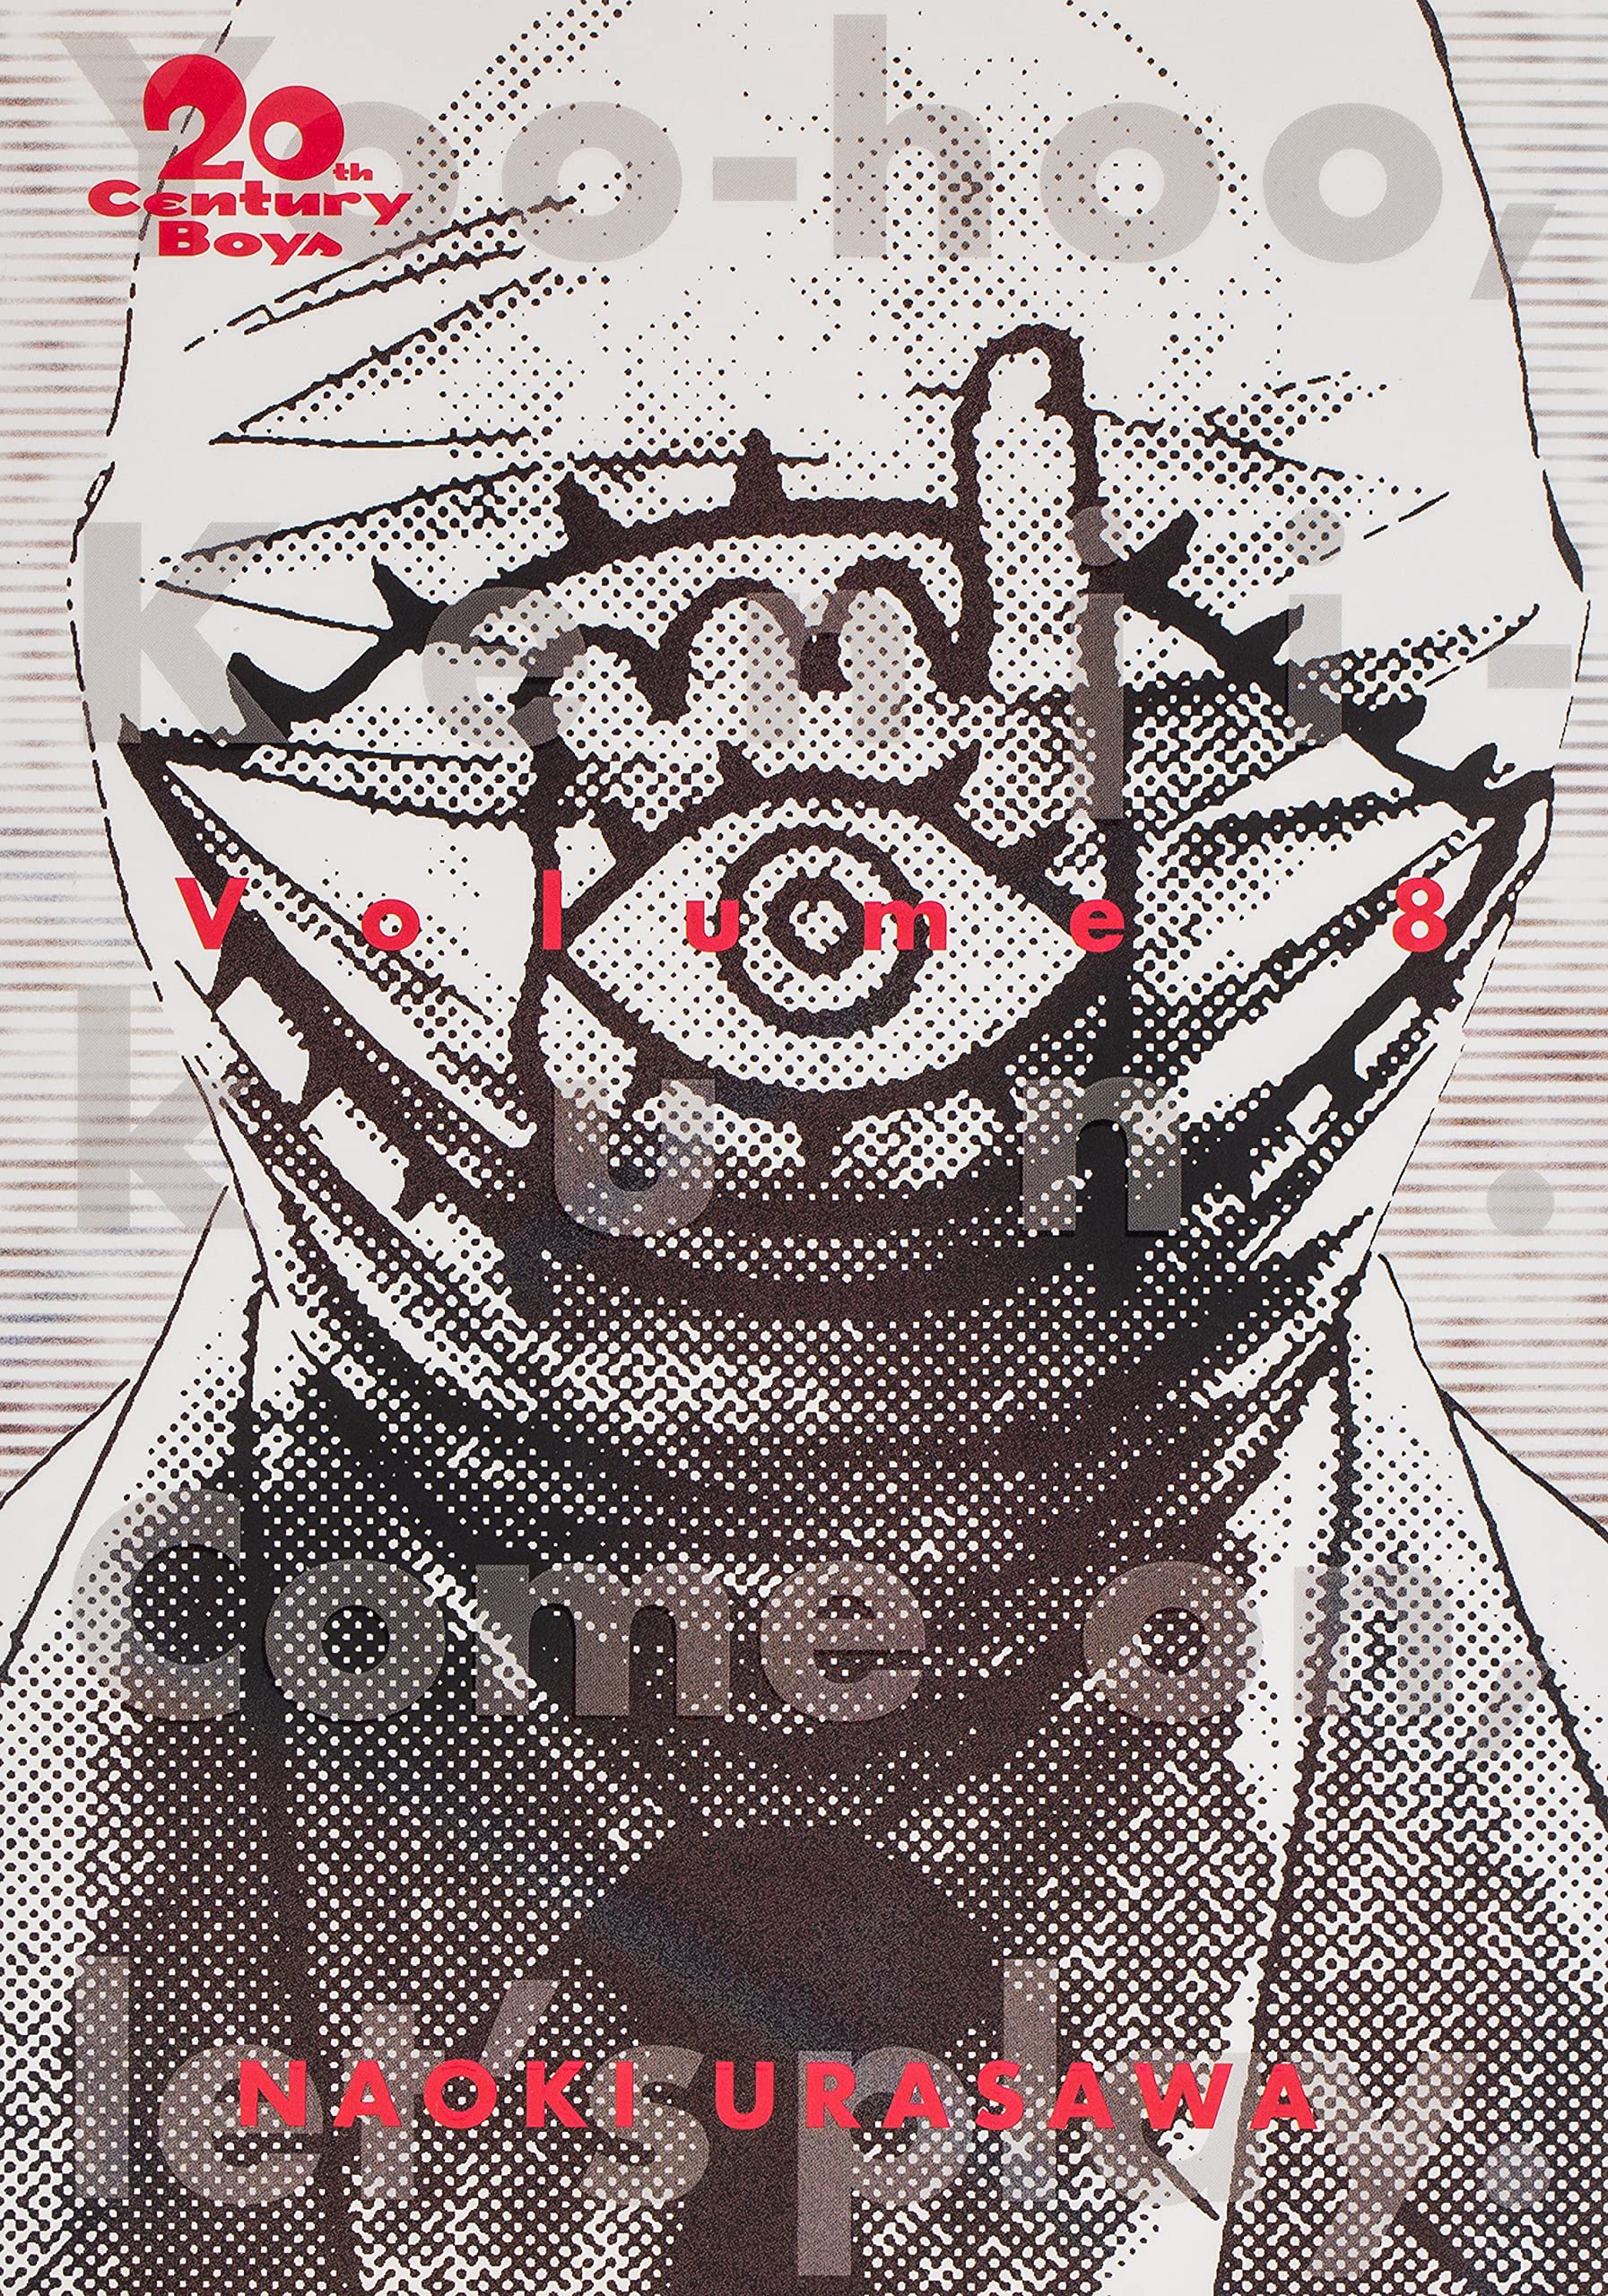 20th Century Boys: The Perfect Edition, Vol. 8 (Volume 8) Paperback – June 16 2020 King Gaming